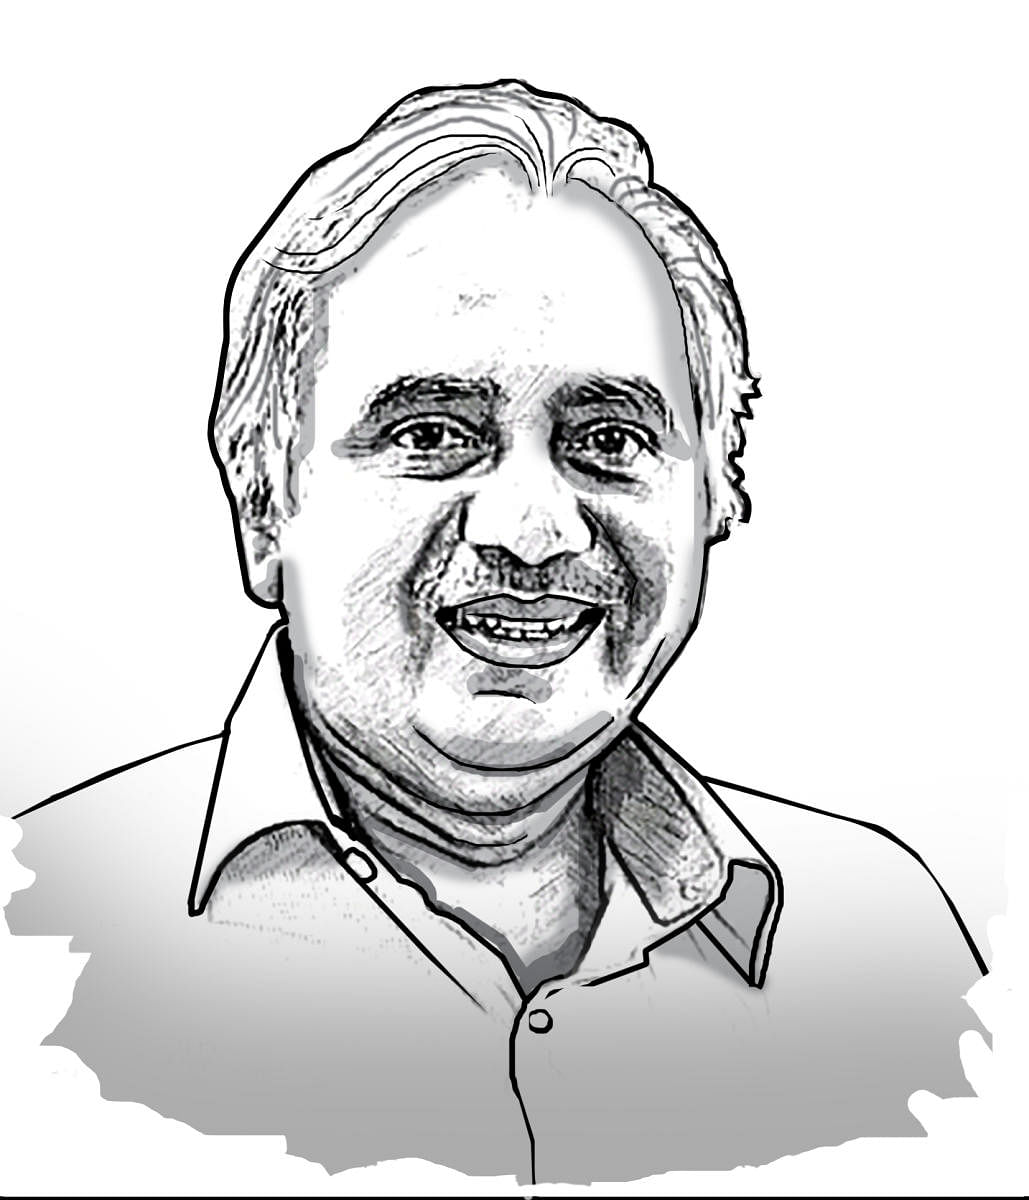 Seshadri Chari reads between the lines on big national and international developments from his vantage point in the BJP and the RSS@seshadrichari